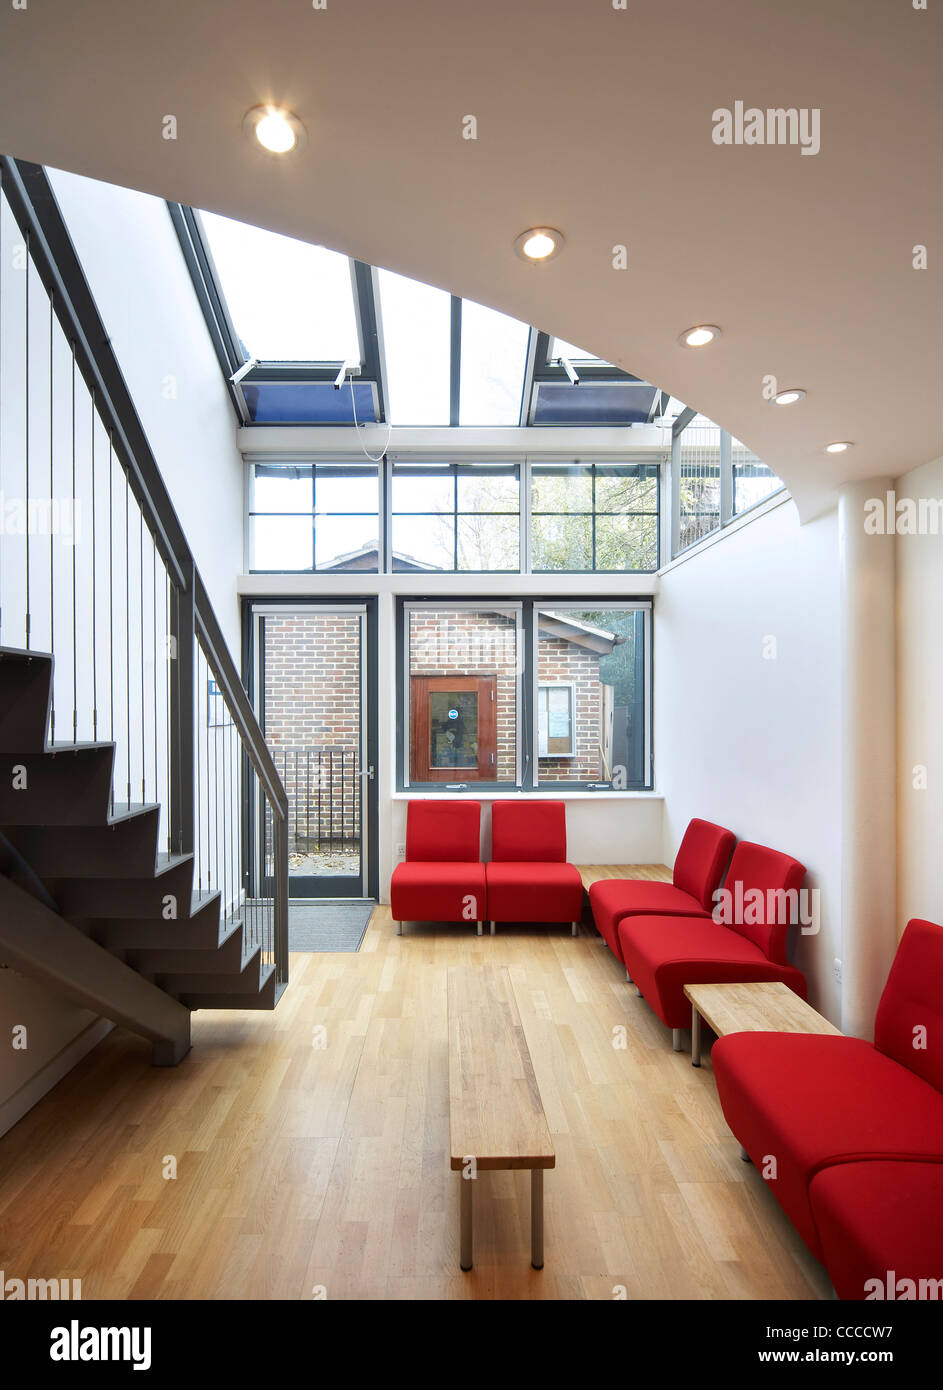 PRIVATE HOUSE ARCHICRAFT ROB MATHISON SOUTH WOODFORD LONDON UK 2009 INTERIOR VIEW OF THE BRIGHT SPACIOUS ENTRANCE AREA SHOWING Stock Photo